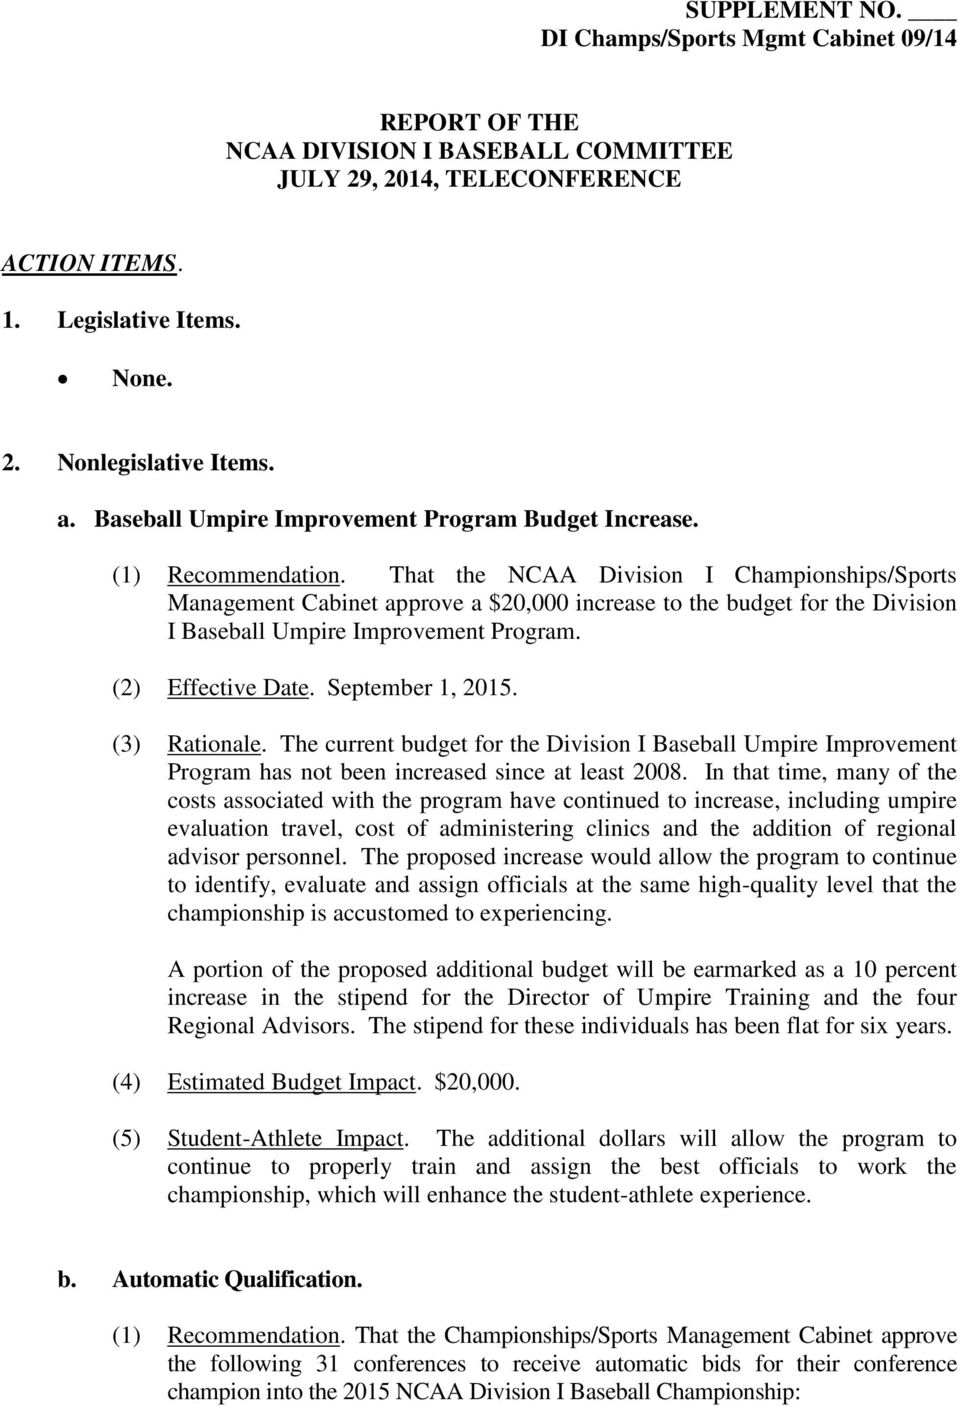 That the NCAA Division I Championships/Sports Management Cabinet approve a $20,000 increase to the budget for the Division I Baseball Umpire Improvement Program. (2) Effective Date. September 1, 2015.